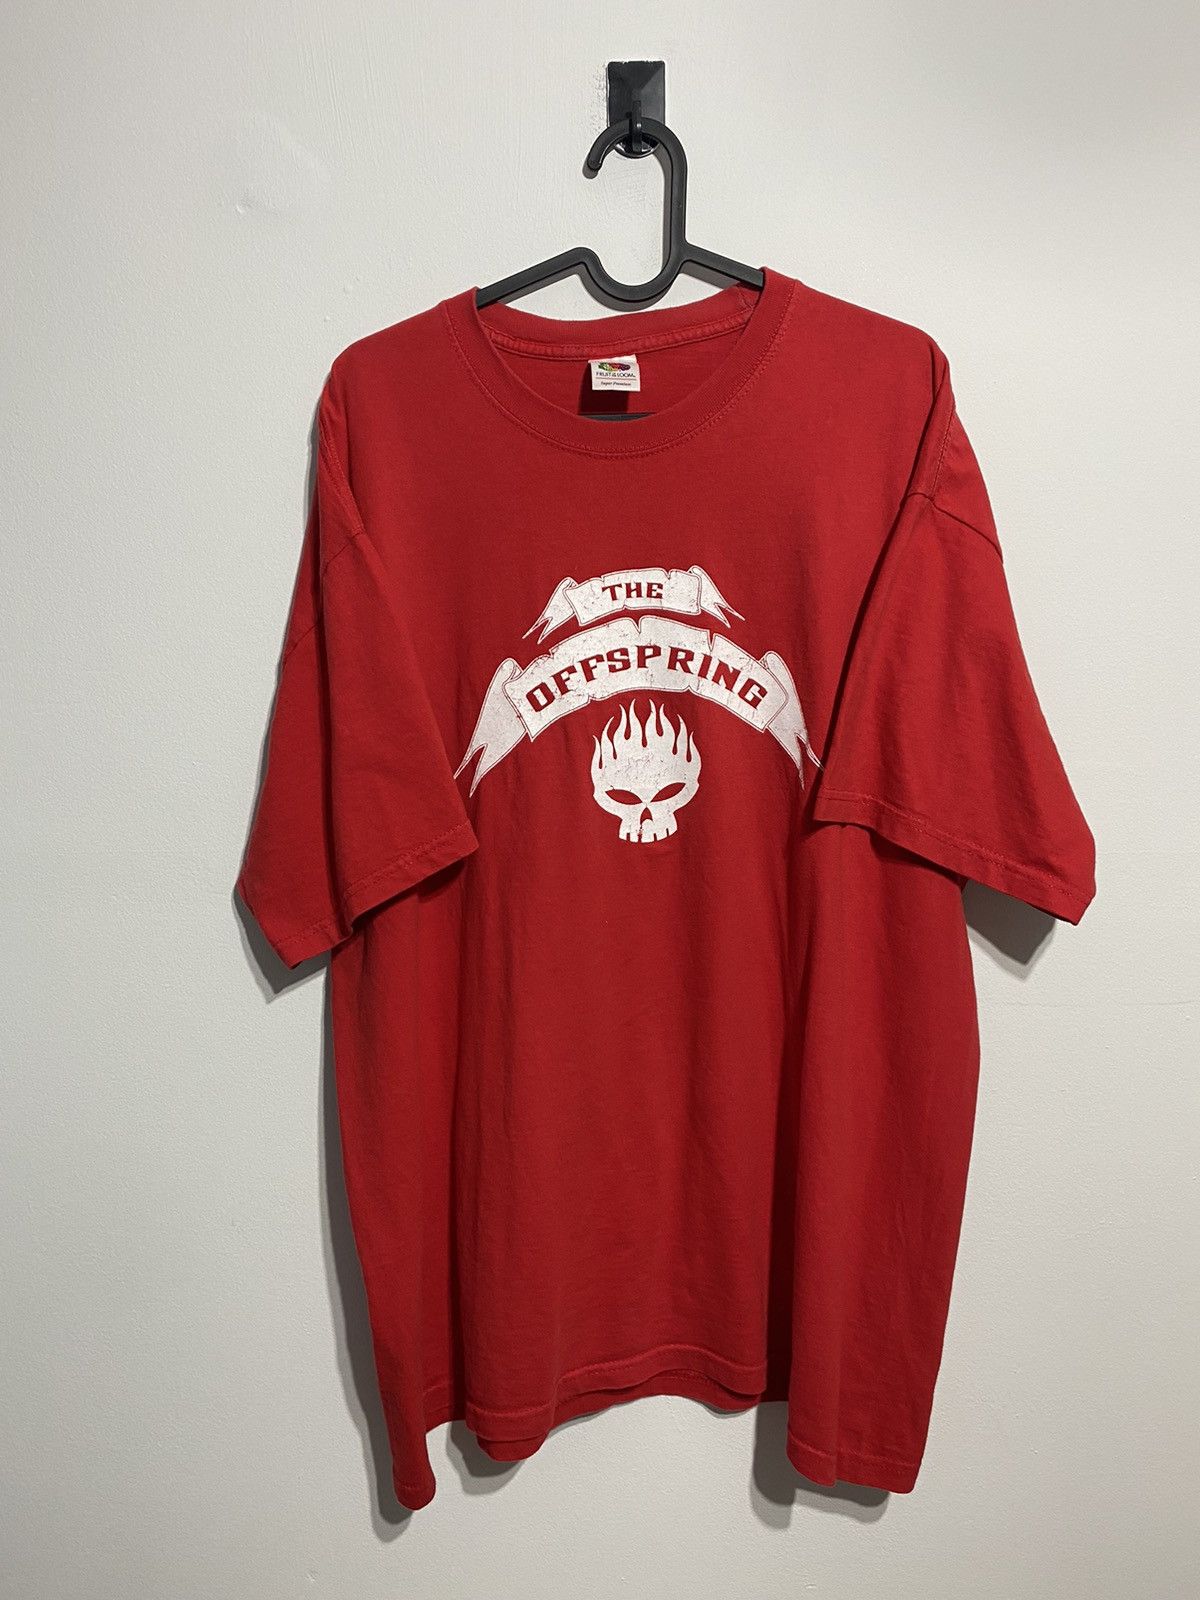 Pre-owned Band Tees X Vintage 00s Vintage The Offspring Red T Shirt